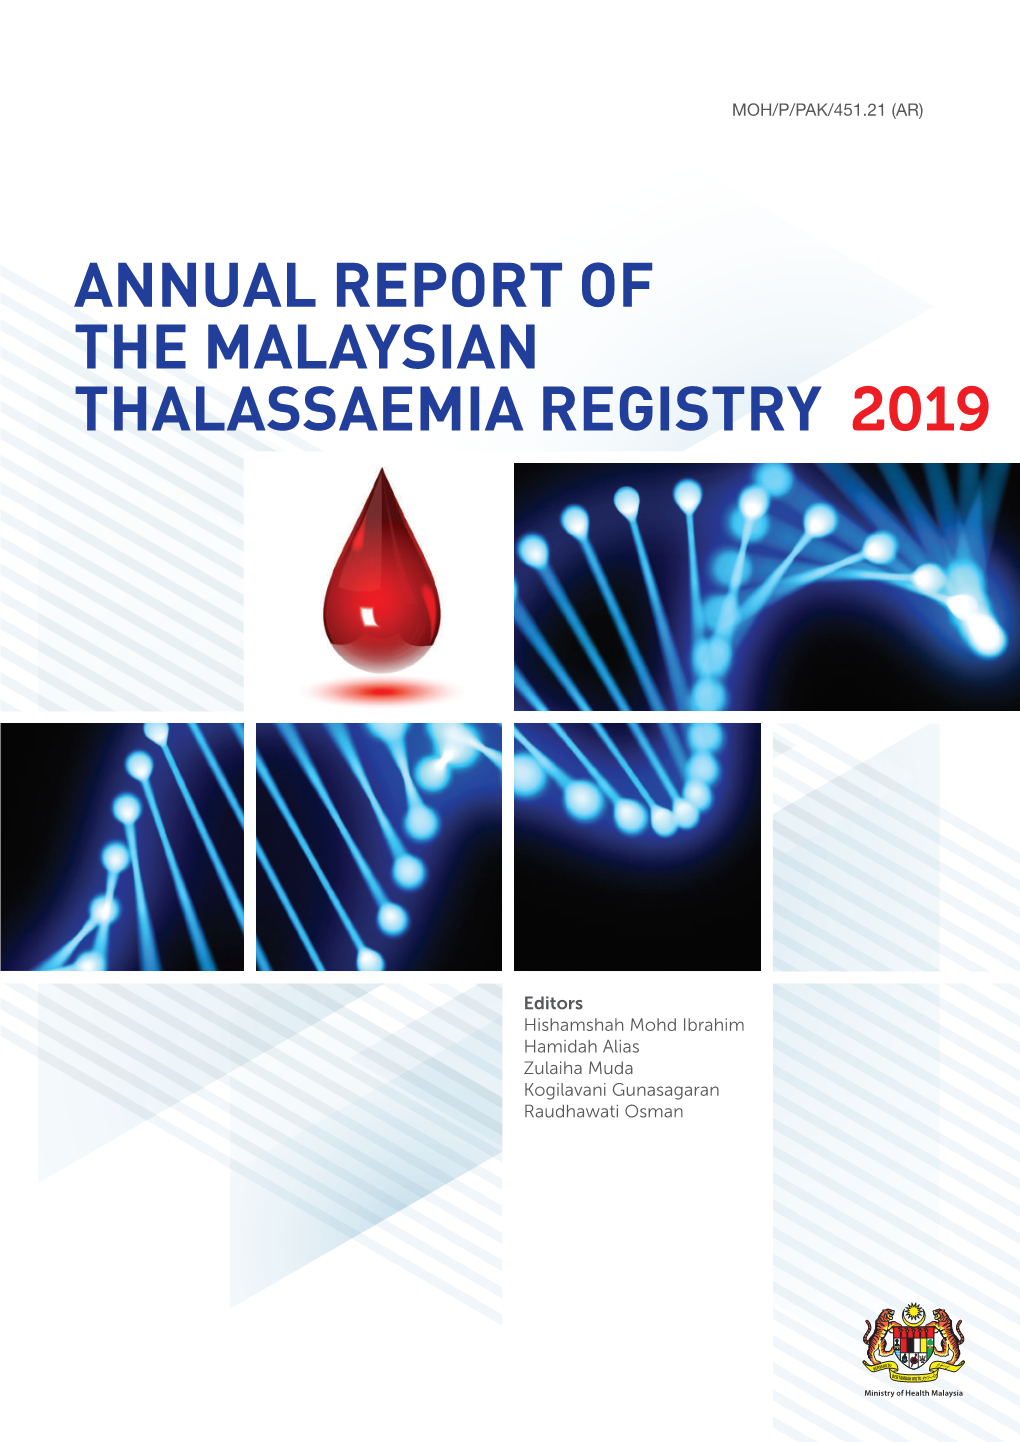 Annual Report of the Malaysian Thalassaemia Registry 2019